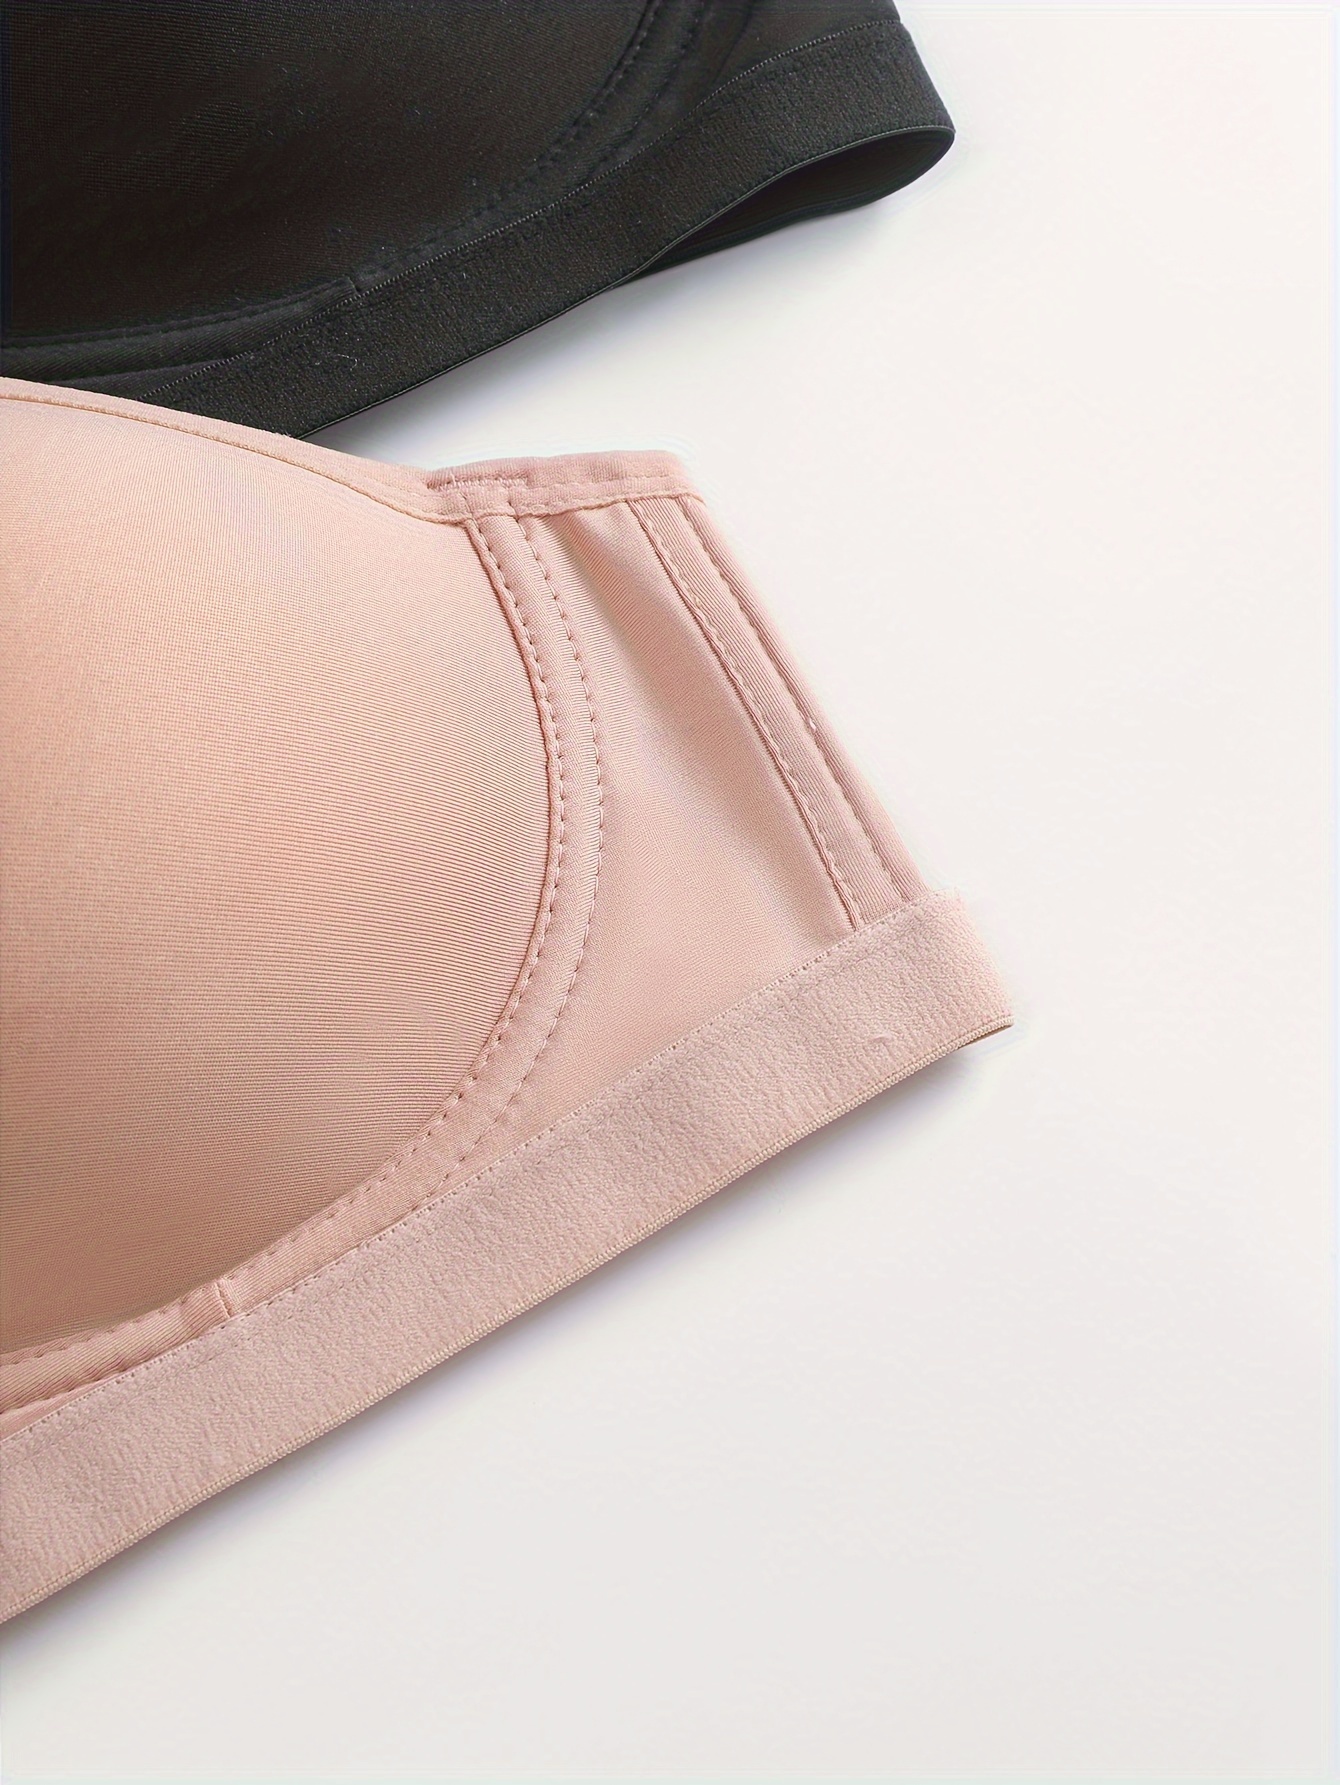 Anti-Sagging, Comfortable and Seamless, This Revolutionary Bra Is All the  Rage Right Now!